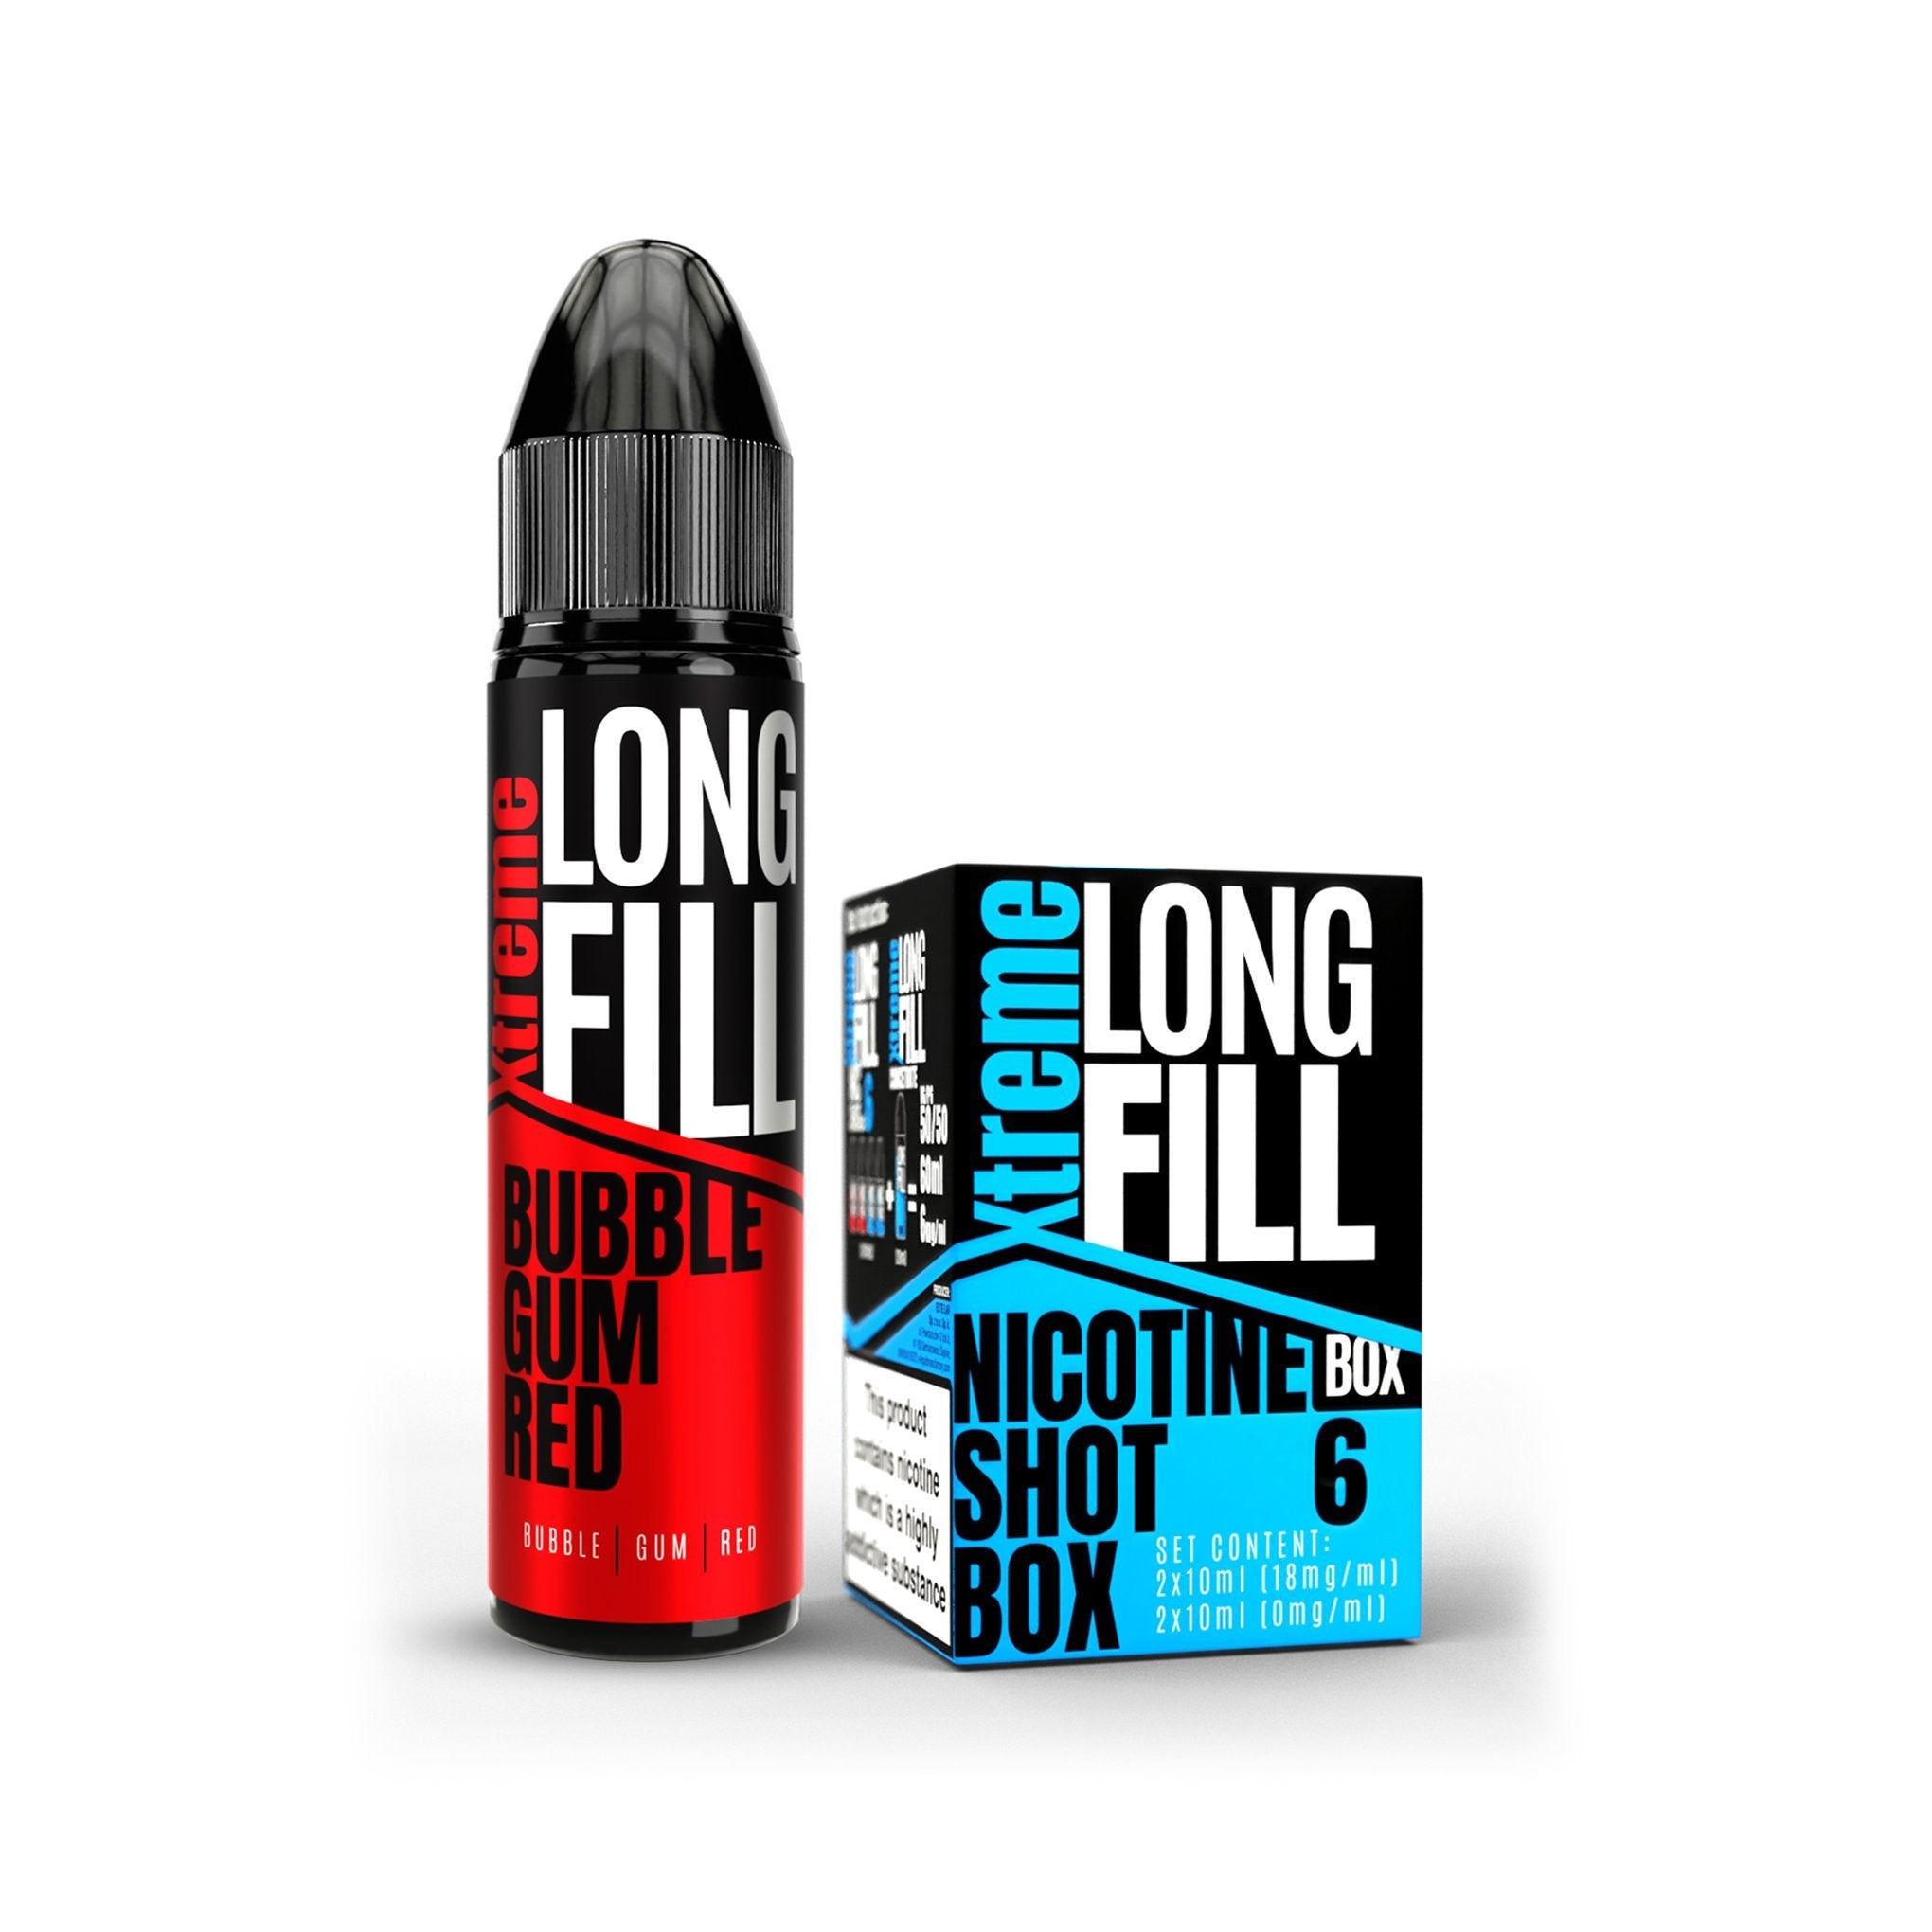 Xtreme Long Fill E-Liquid Bubble Gum Red 6MG - Low Nicotine